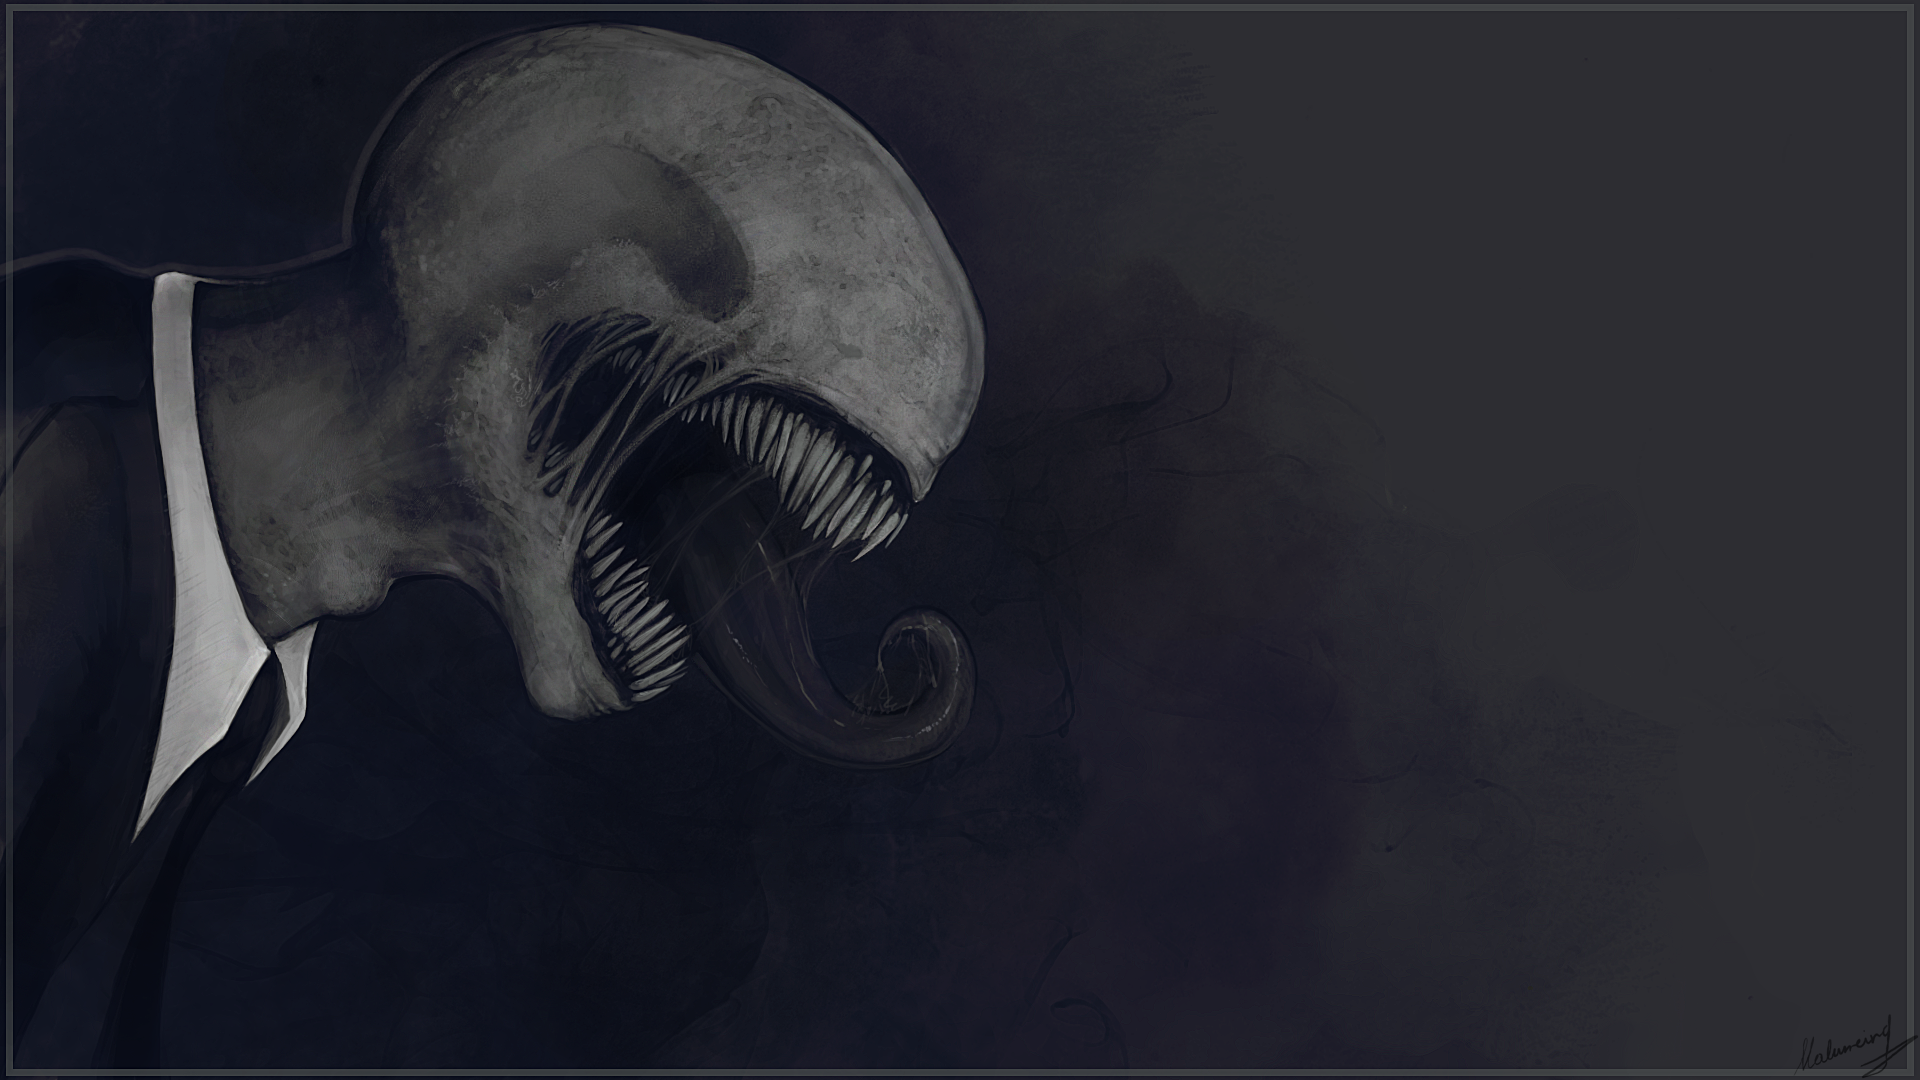 Video Game Slender: The Eight Pages HD Wallpaper | Background Image